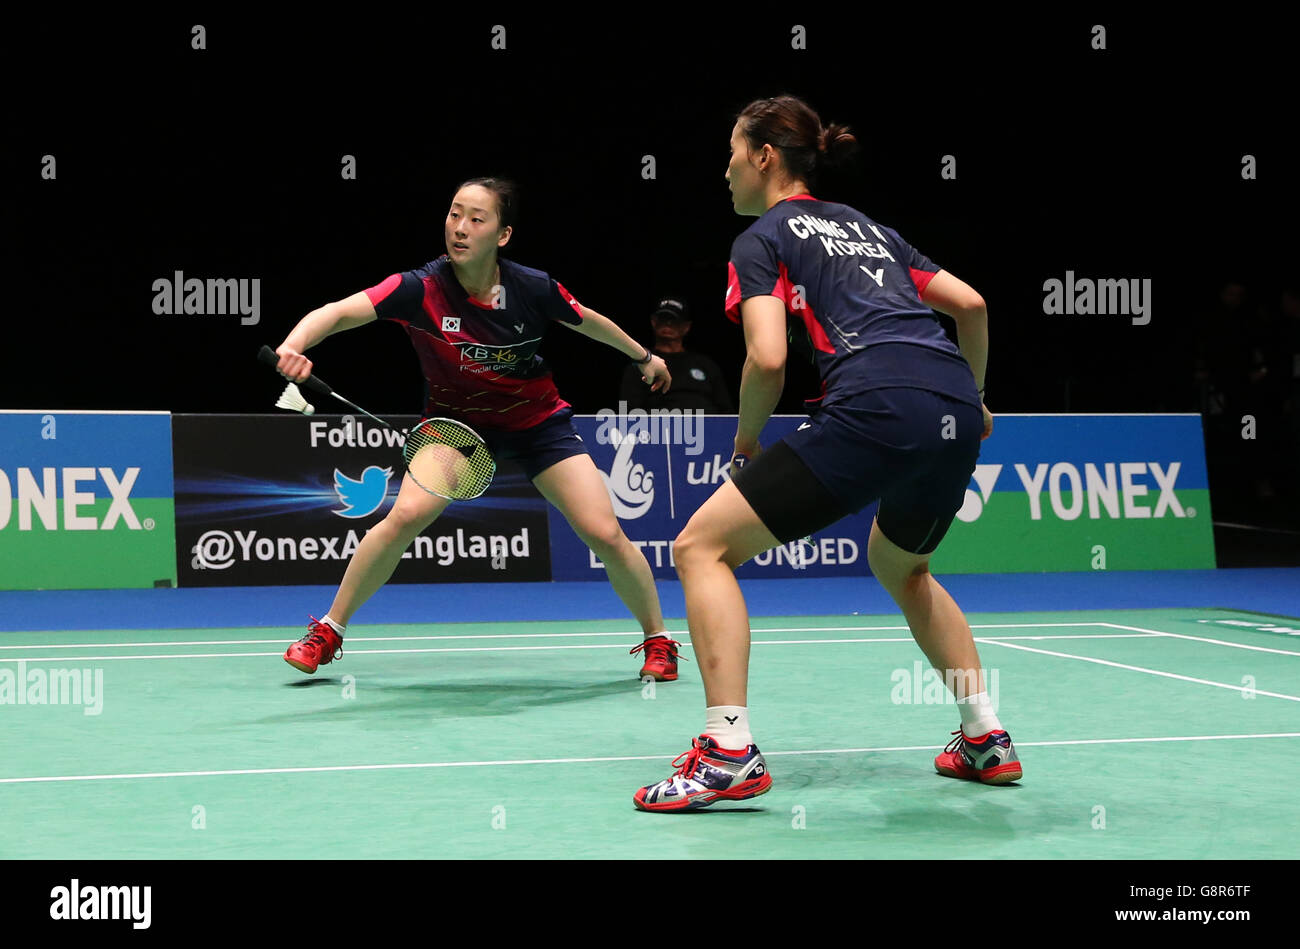 South Korea's So Hee Lee (left) and Ye Na Chang during their doubles match on day two of the YONEX All England Open Badminton Championships at the Barclaycard Arena, Birmingham. Stock Photo